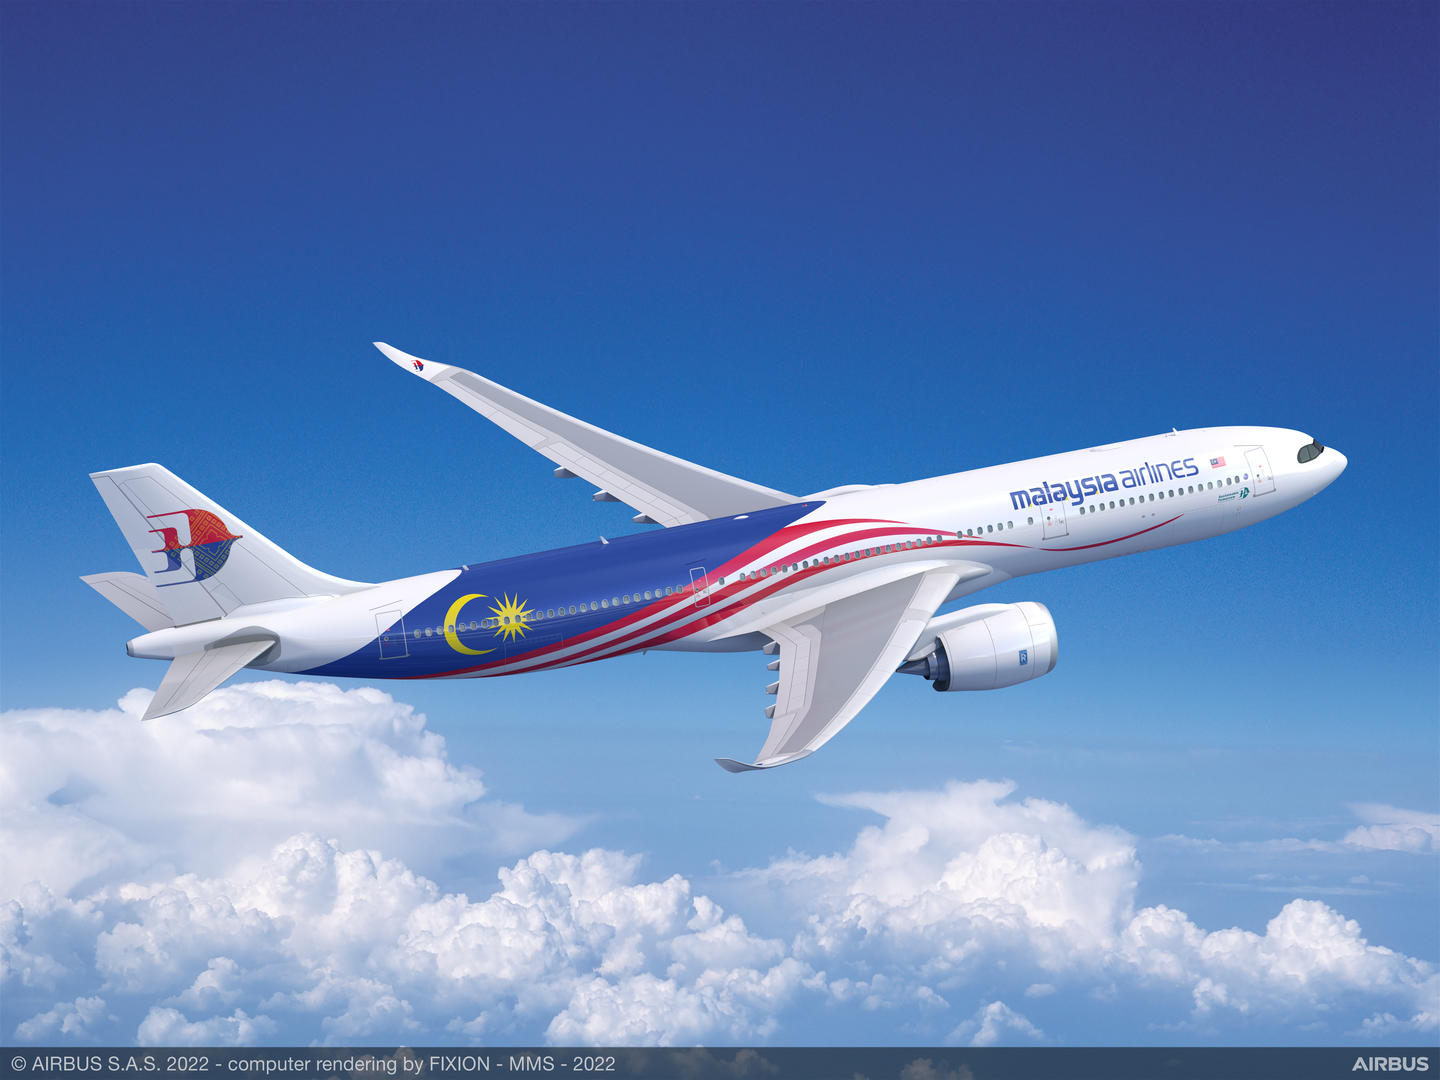 Airbus A330-900neo in the Malaysia Airlines livery following its order announcement with Airbus. Photo Credit: Airbus